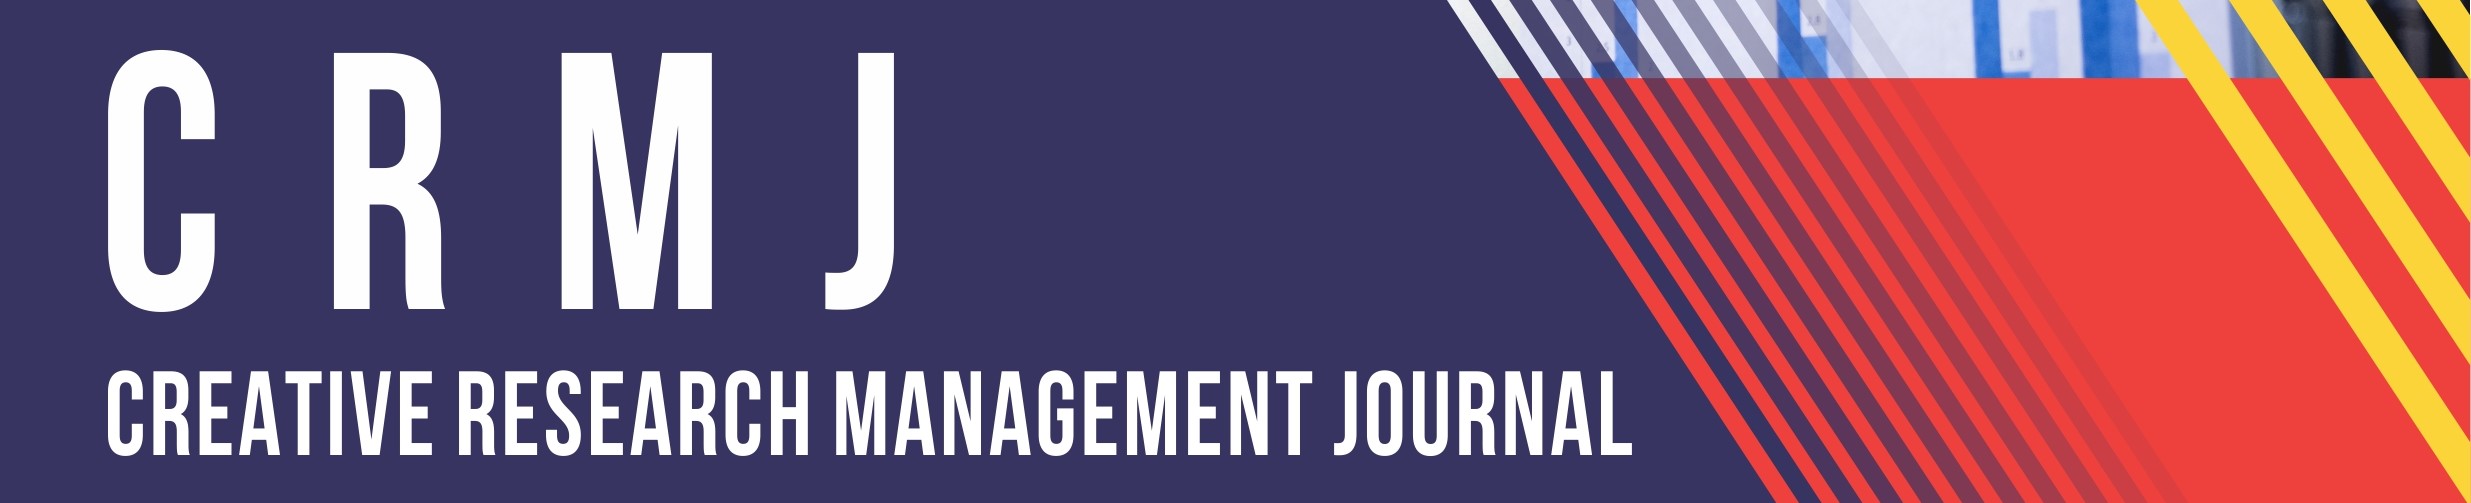  Creative Research Management Journal